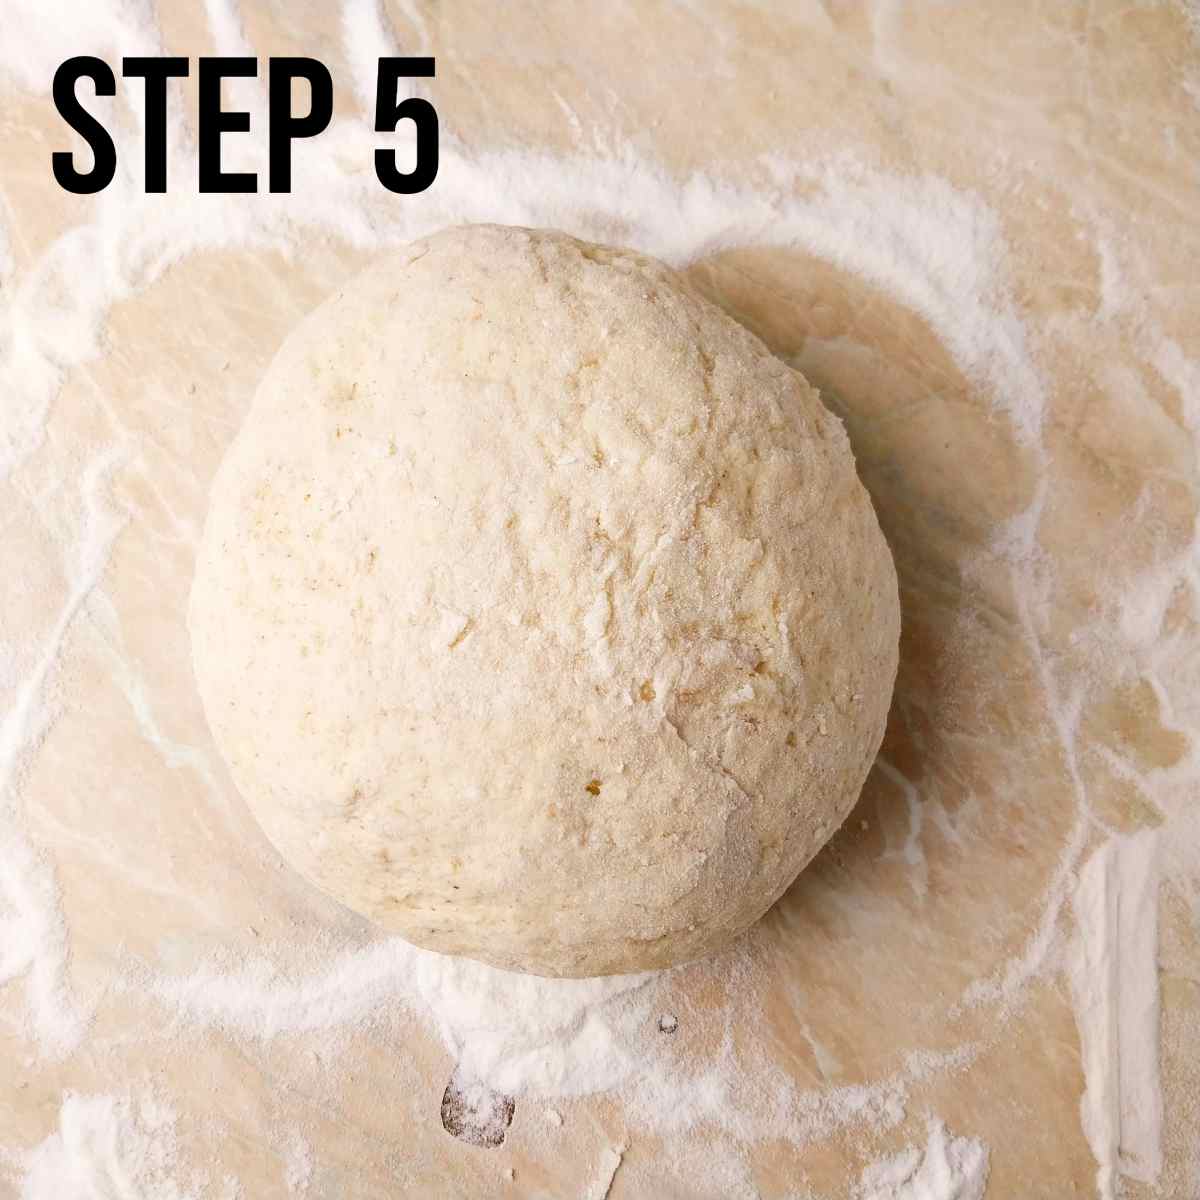 The dough shaped in a ball.